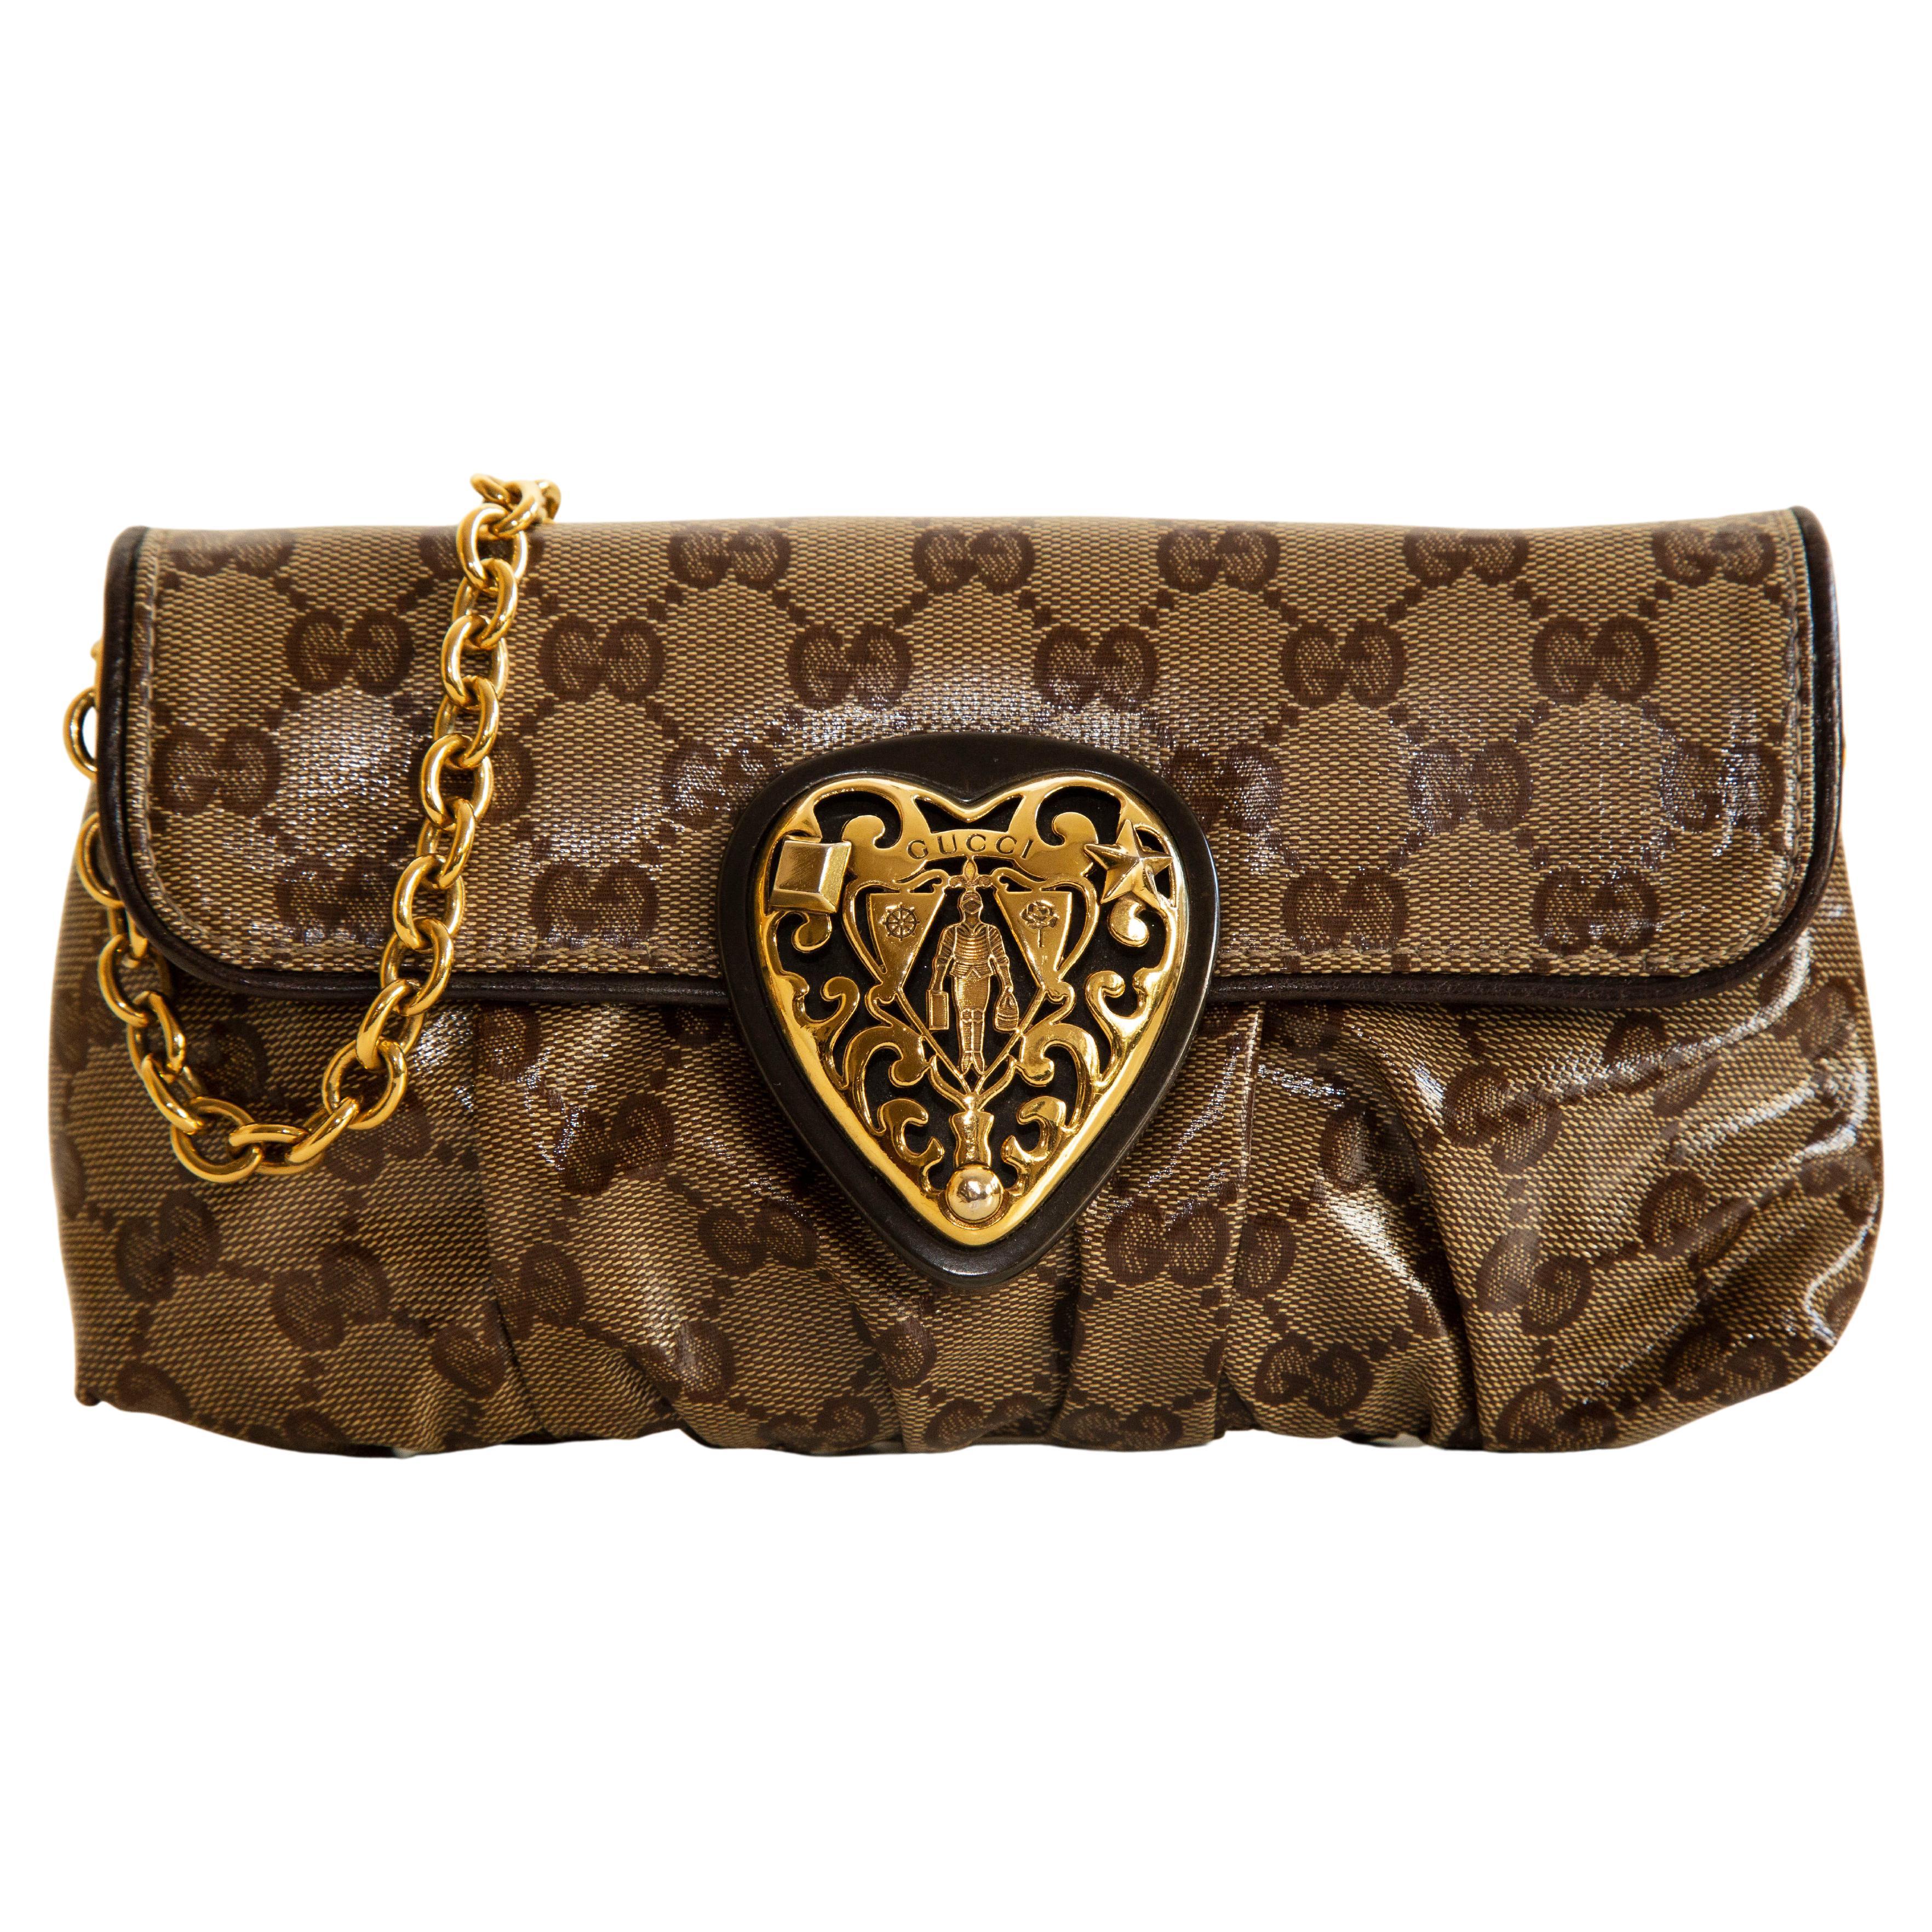 Gucci Clutches & Evening Bags for Sale at Auction